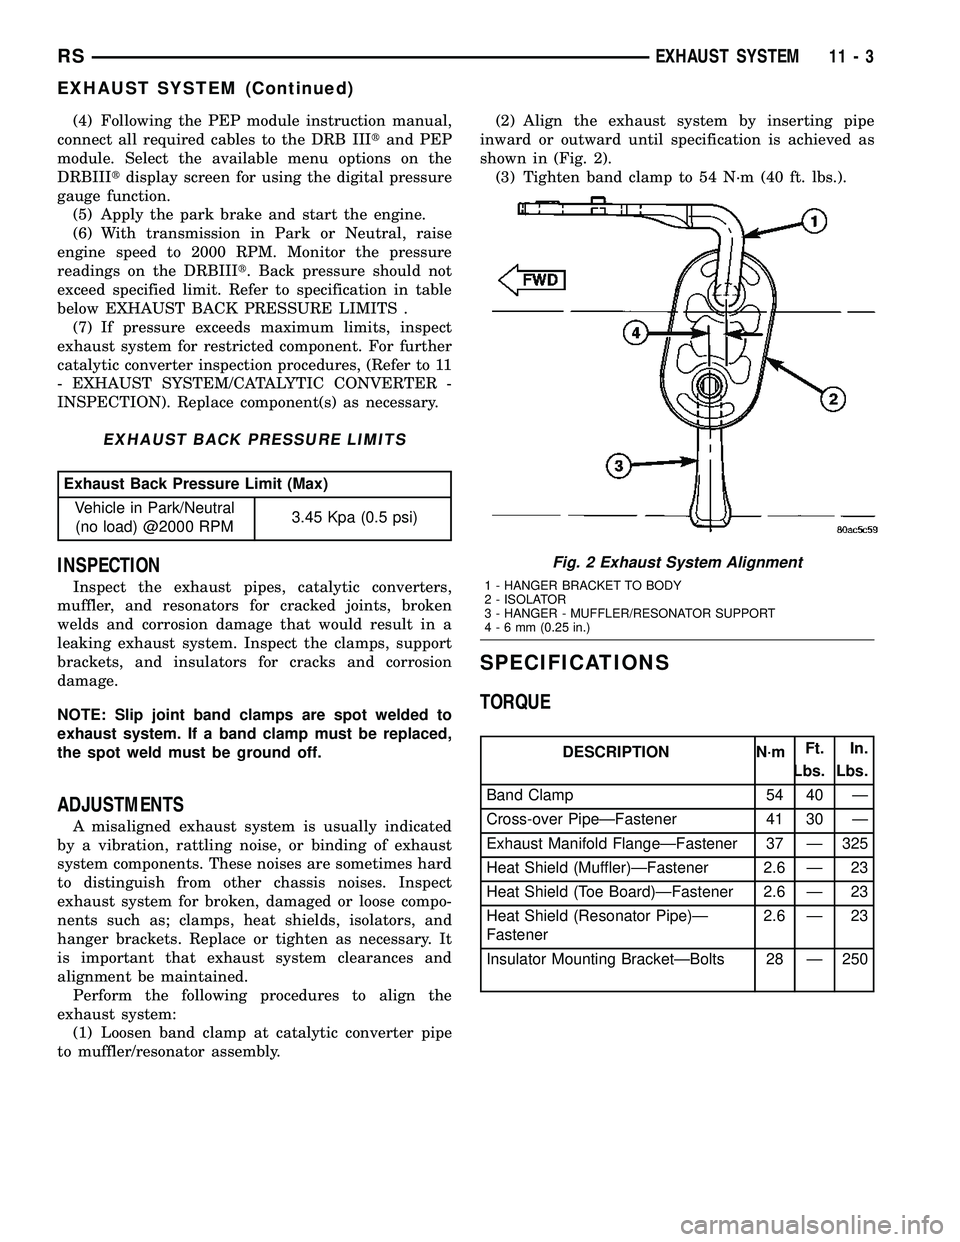 CHRYSLER VOYAGER 2004  Service Manual (4) Following the PEP module instruction manual,
connect all required cables to the DRB IIItand PEP
module. Select the available menu options on the
DRBIIItdisplay screen for using the digital pressur